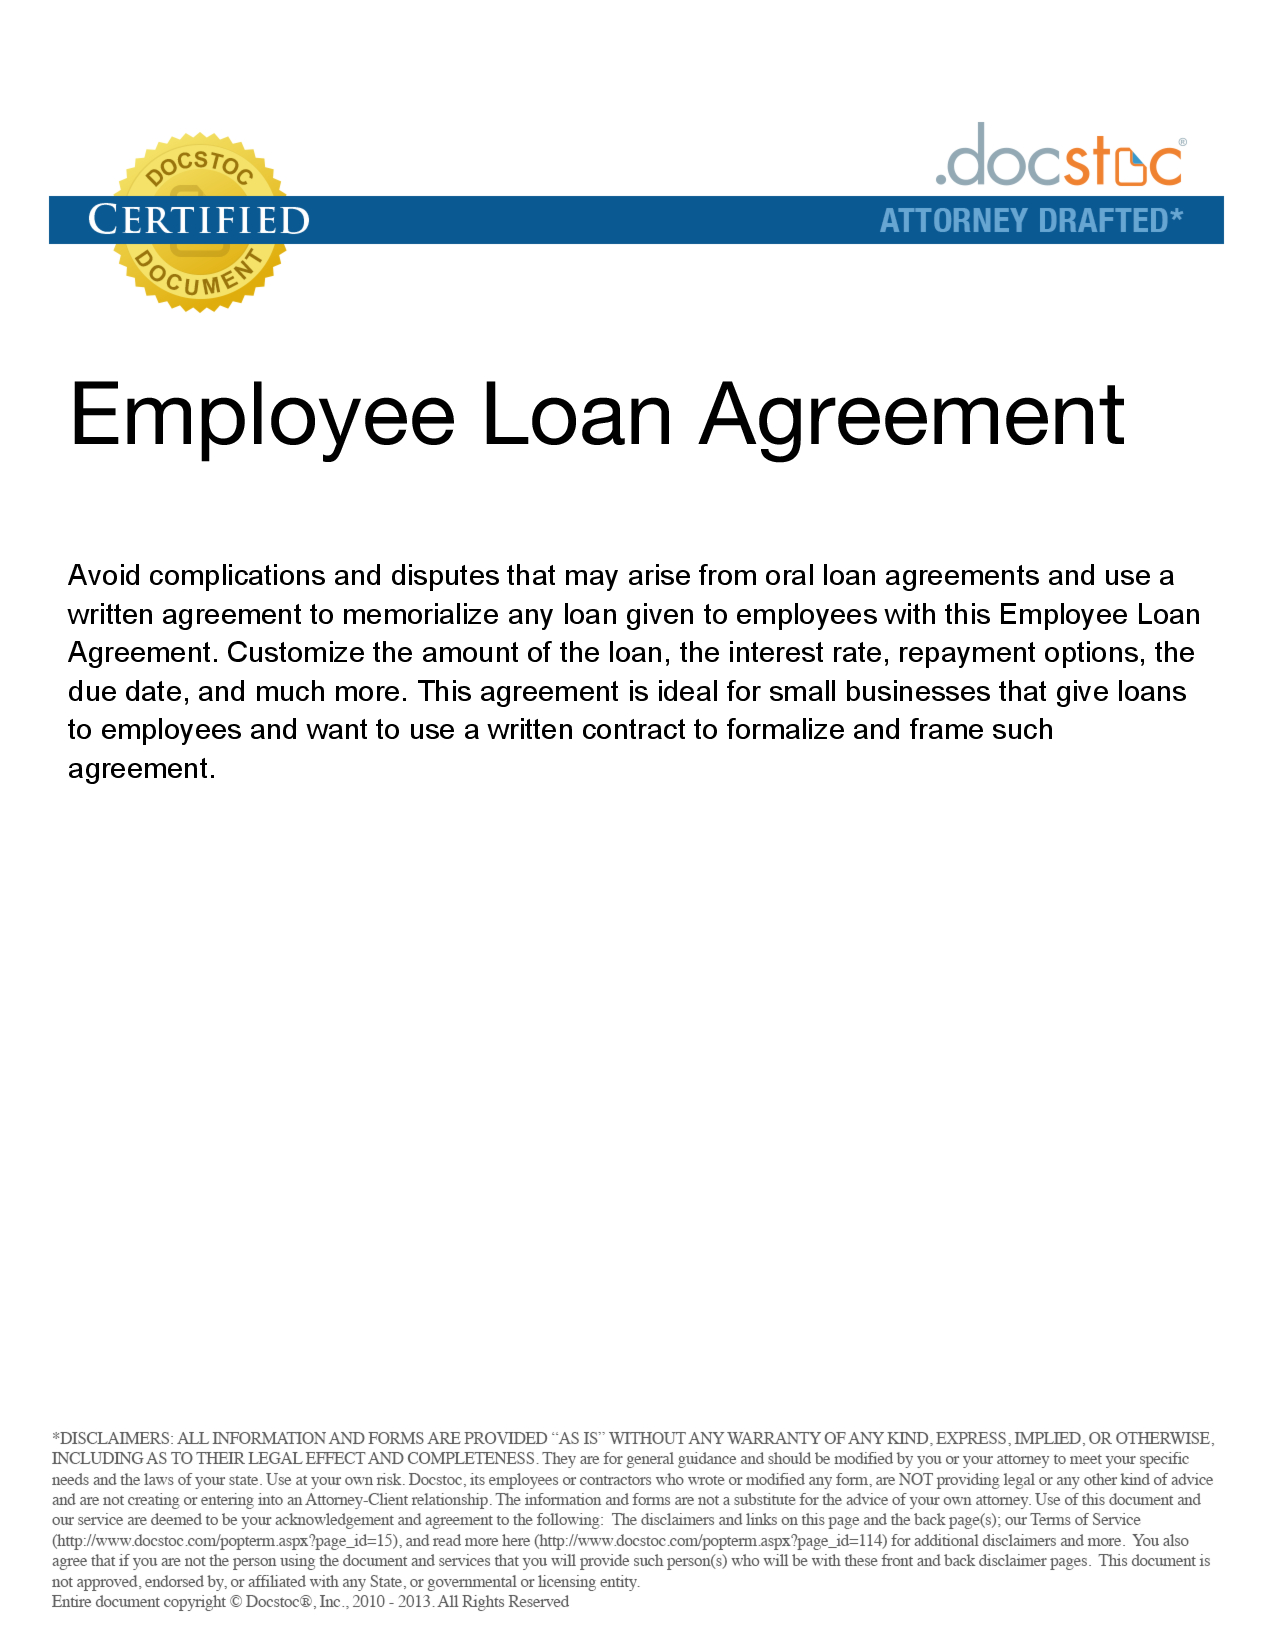 Personal Loan Repayment Agreement Template  Koikoikoi  Personal with Employee Repayment Agreement Template